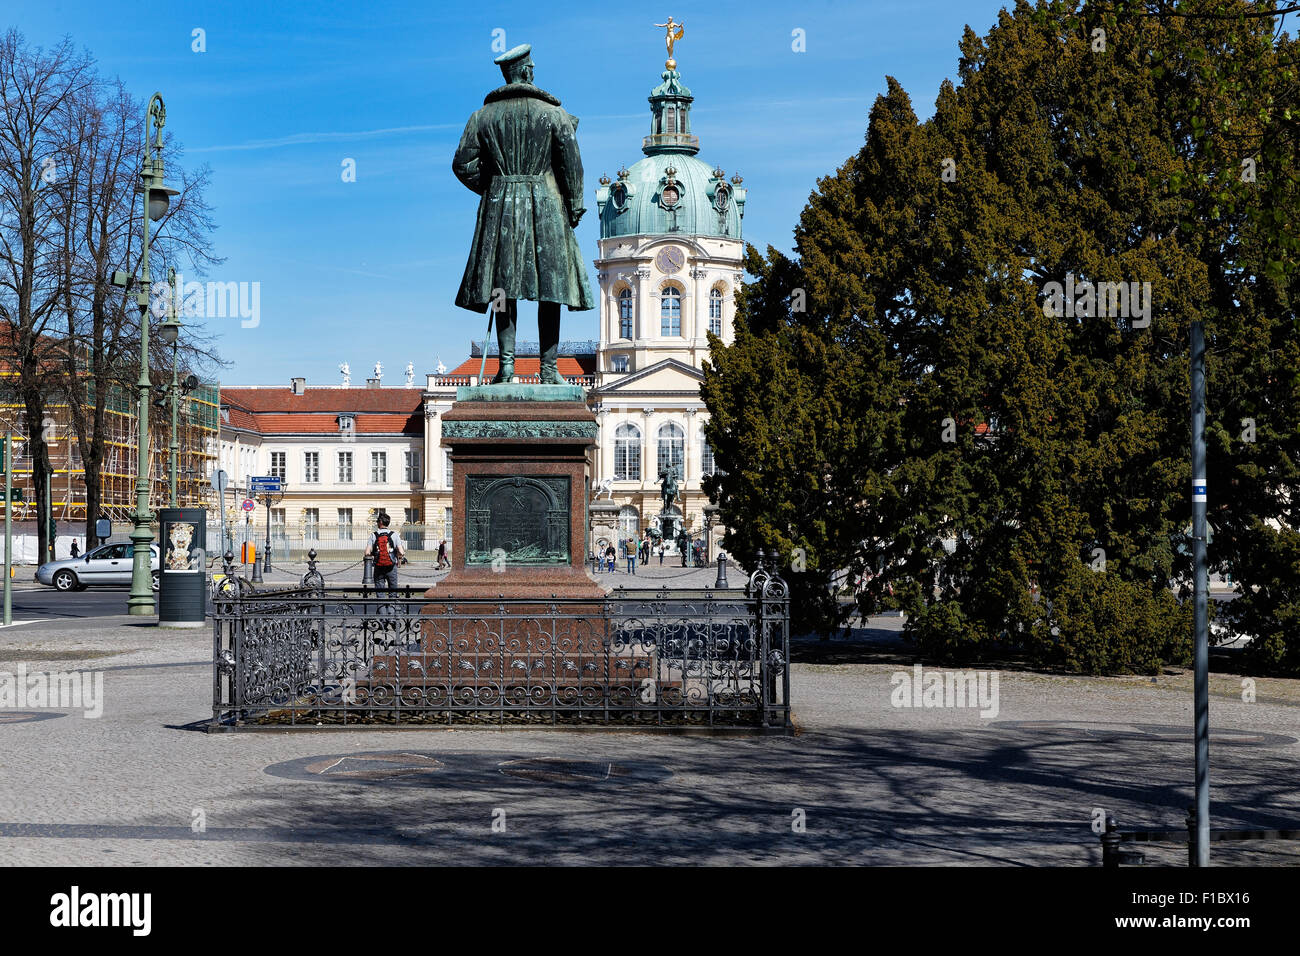 Berlin, Germany, Charlottenburg Palace and the monument to Prince Albrecht of Prussia Stock Photo